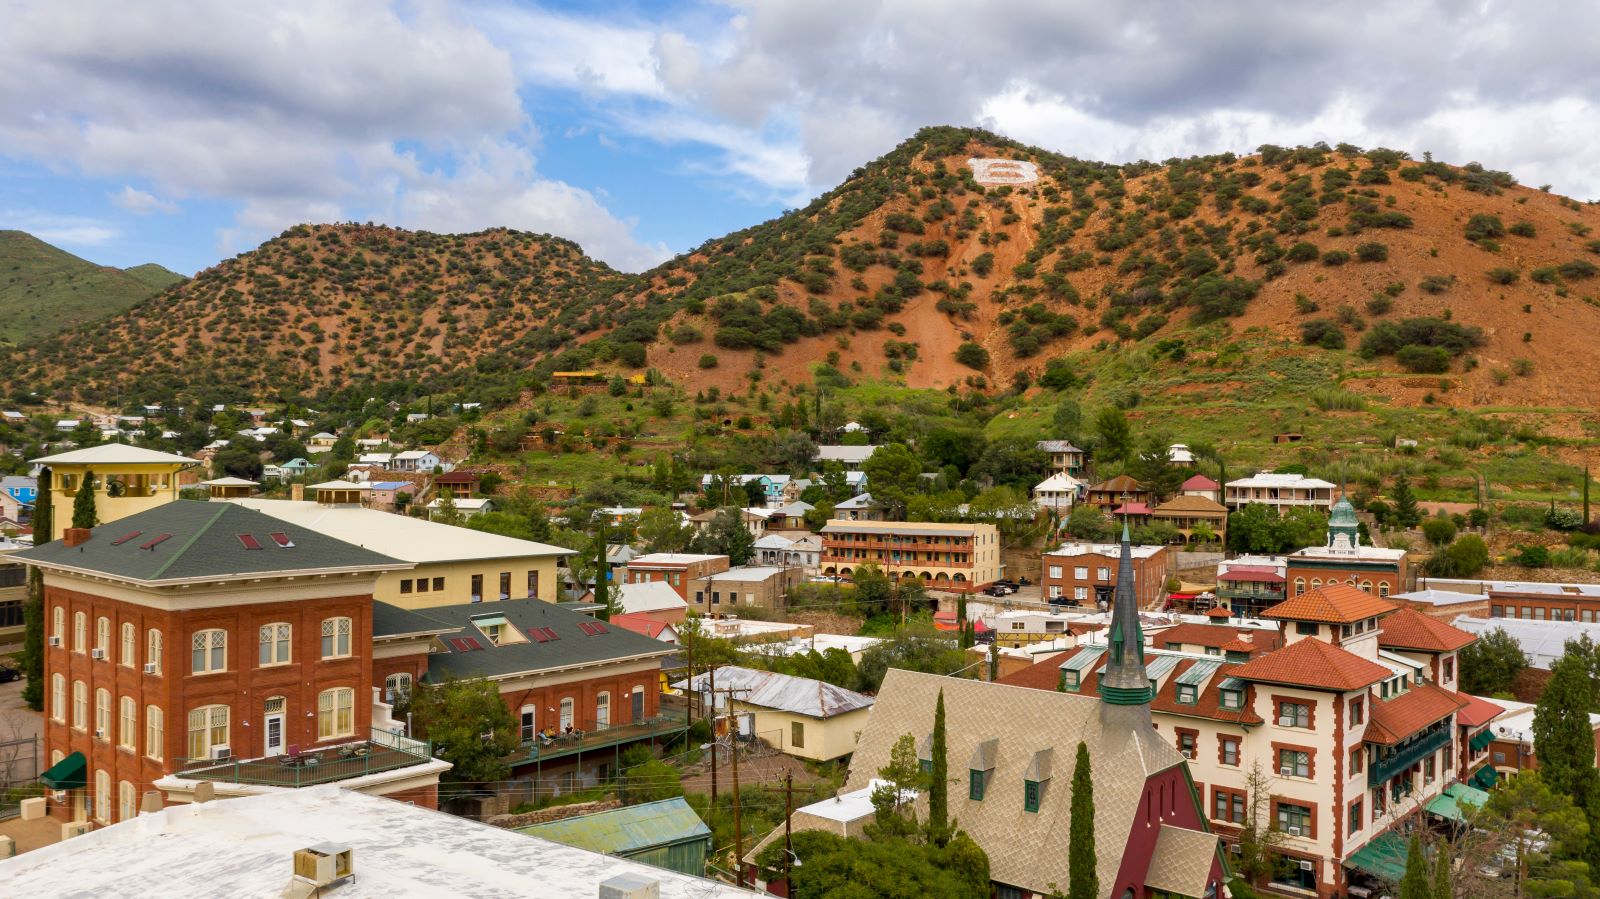 Image Credit: Shutterstock / Real Window Creative <p>Step into the time capsule that is Bisbee, a mining town turned artist colony. Wandering through its hilly streets offers eclectic art and history, minus the expensive frills. It’s history, culture, and charm, all wrapped in an affordable package.</p>